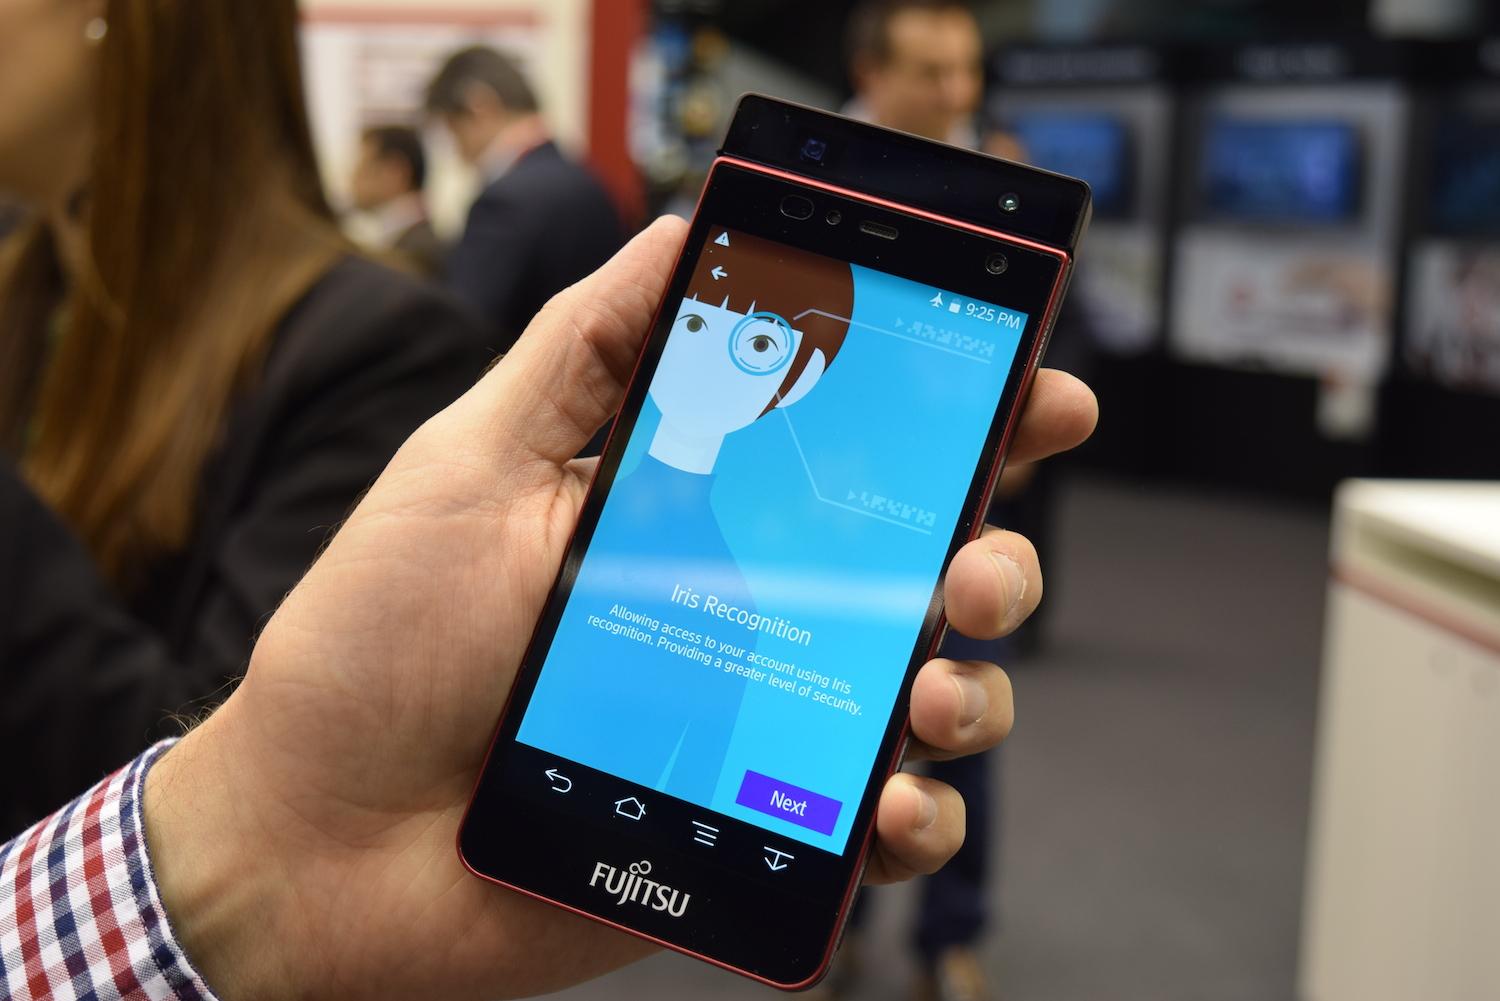 amazing iris scanner lets you unlock your phone and pay bills with eyes delta id fujitsu